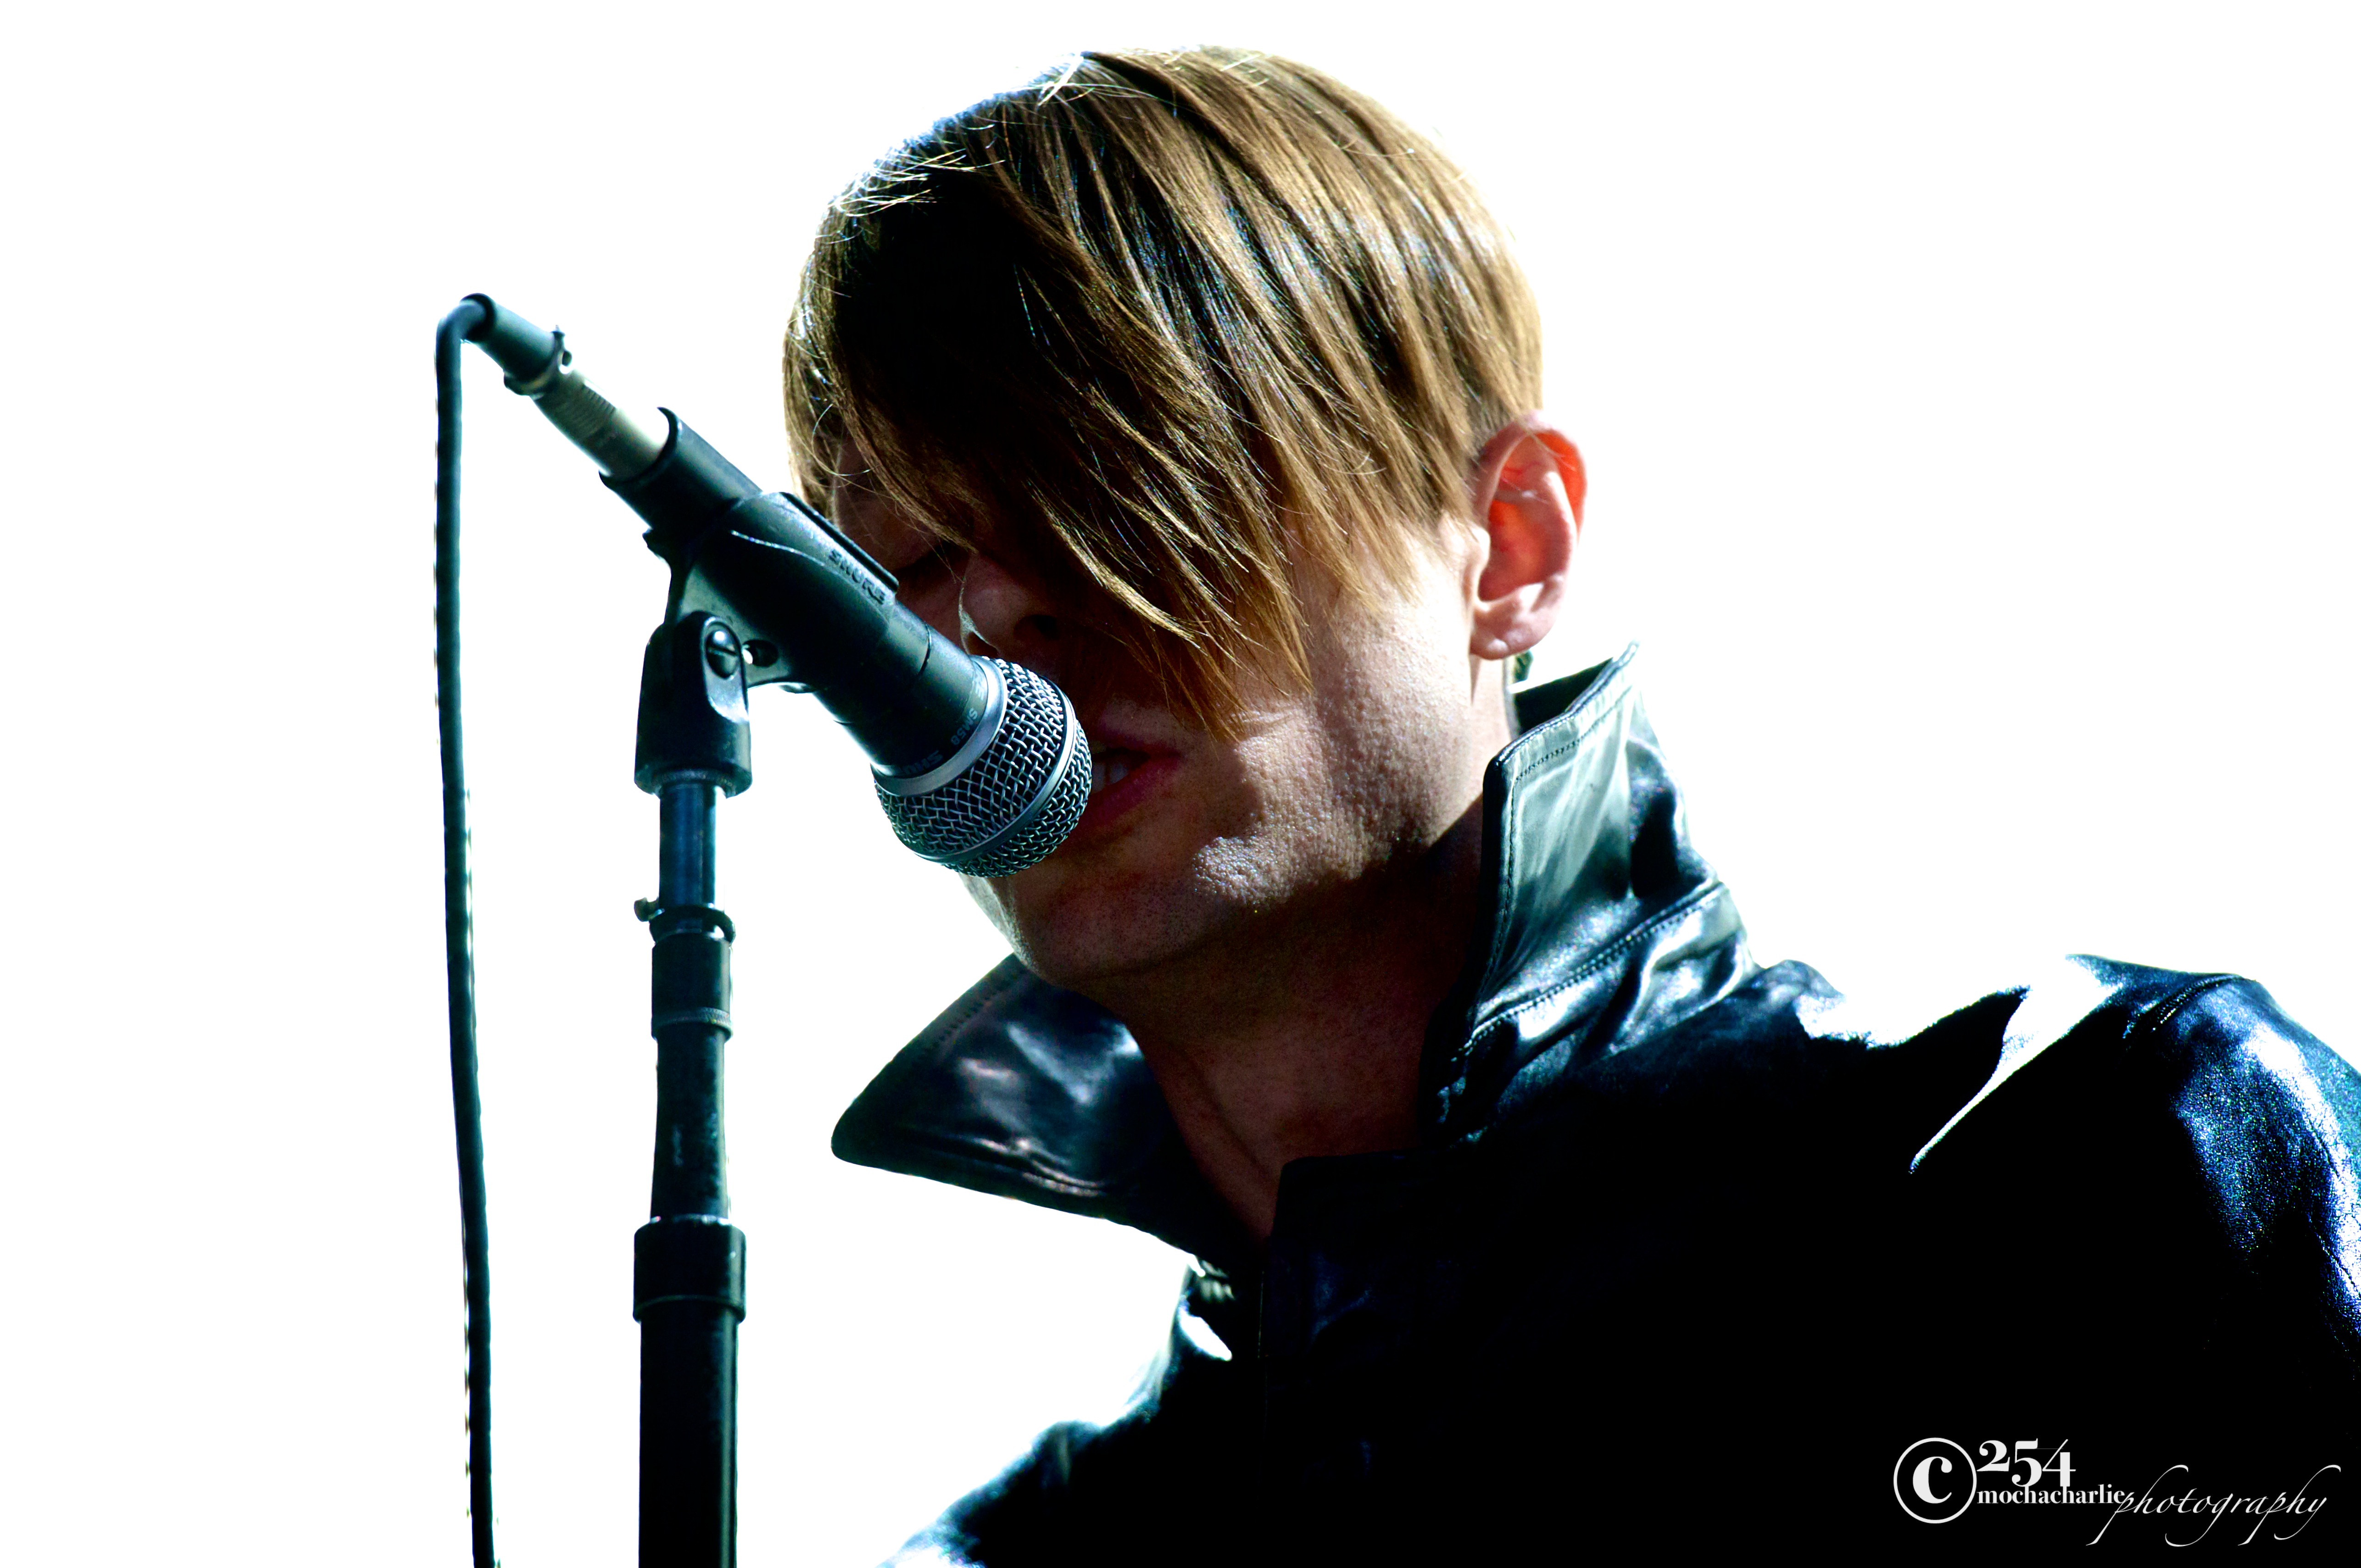 Cold Cave at White River Ampitheatre (Photo by Mocha Charlie)